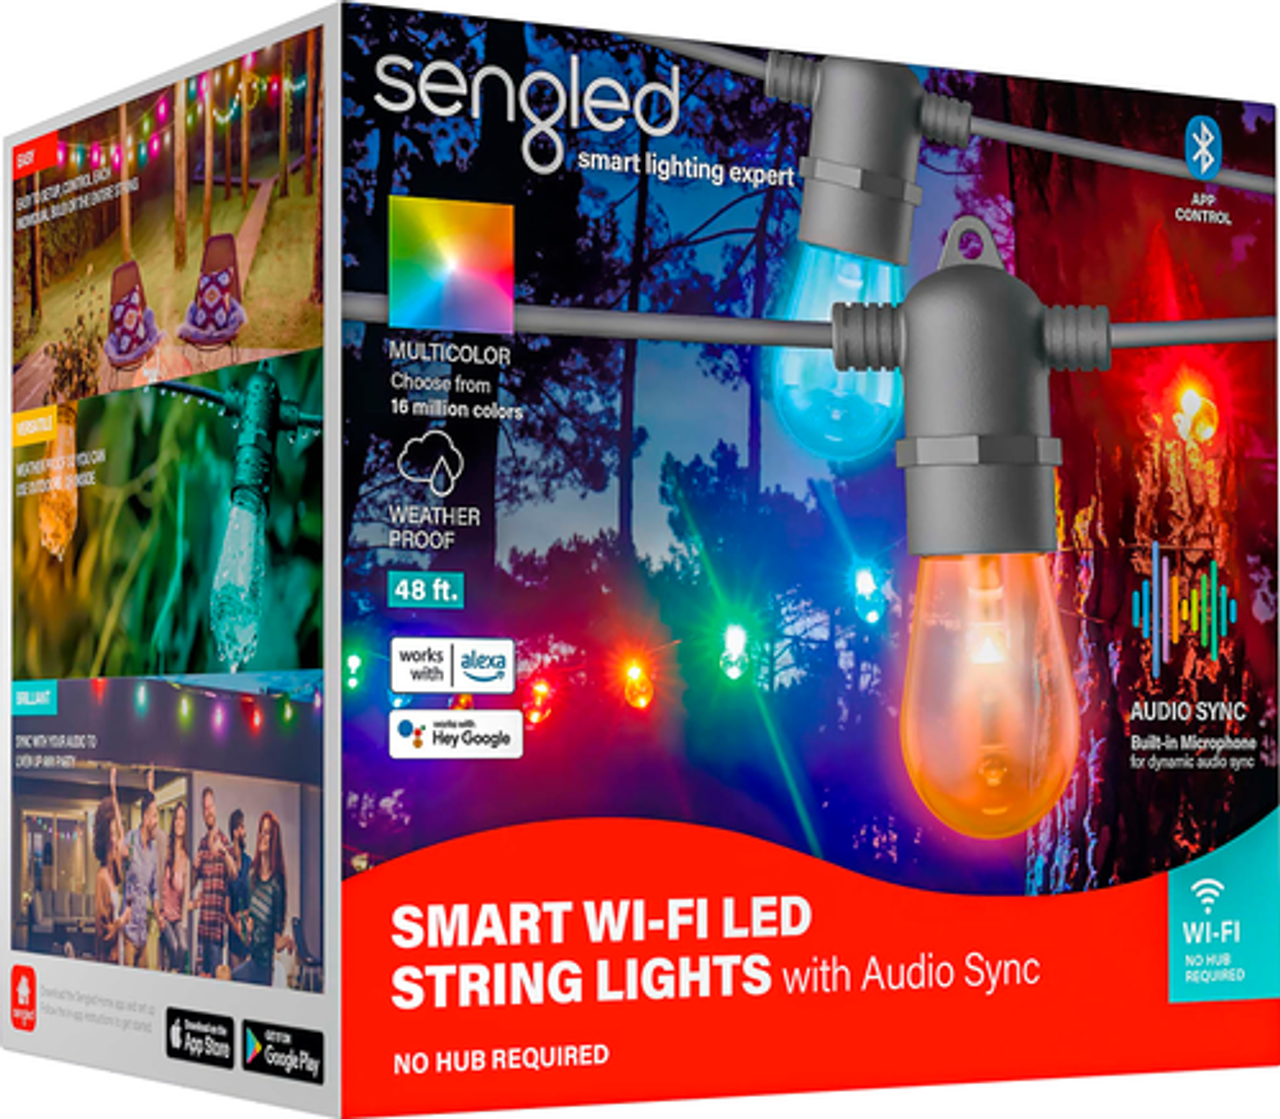 Sengled - Multicolor 48FT String Lights with Audio Sync - Multicolor